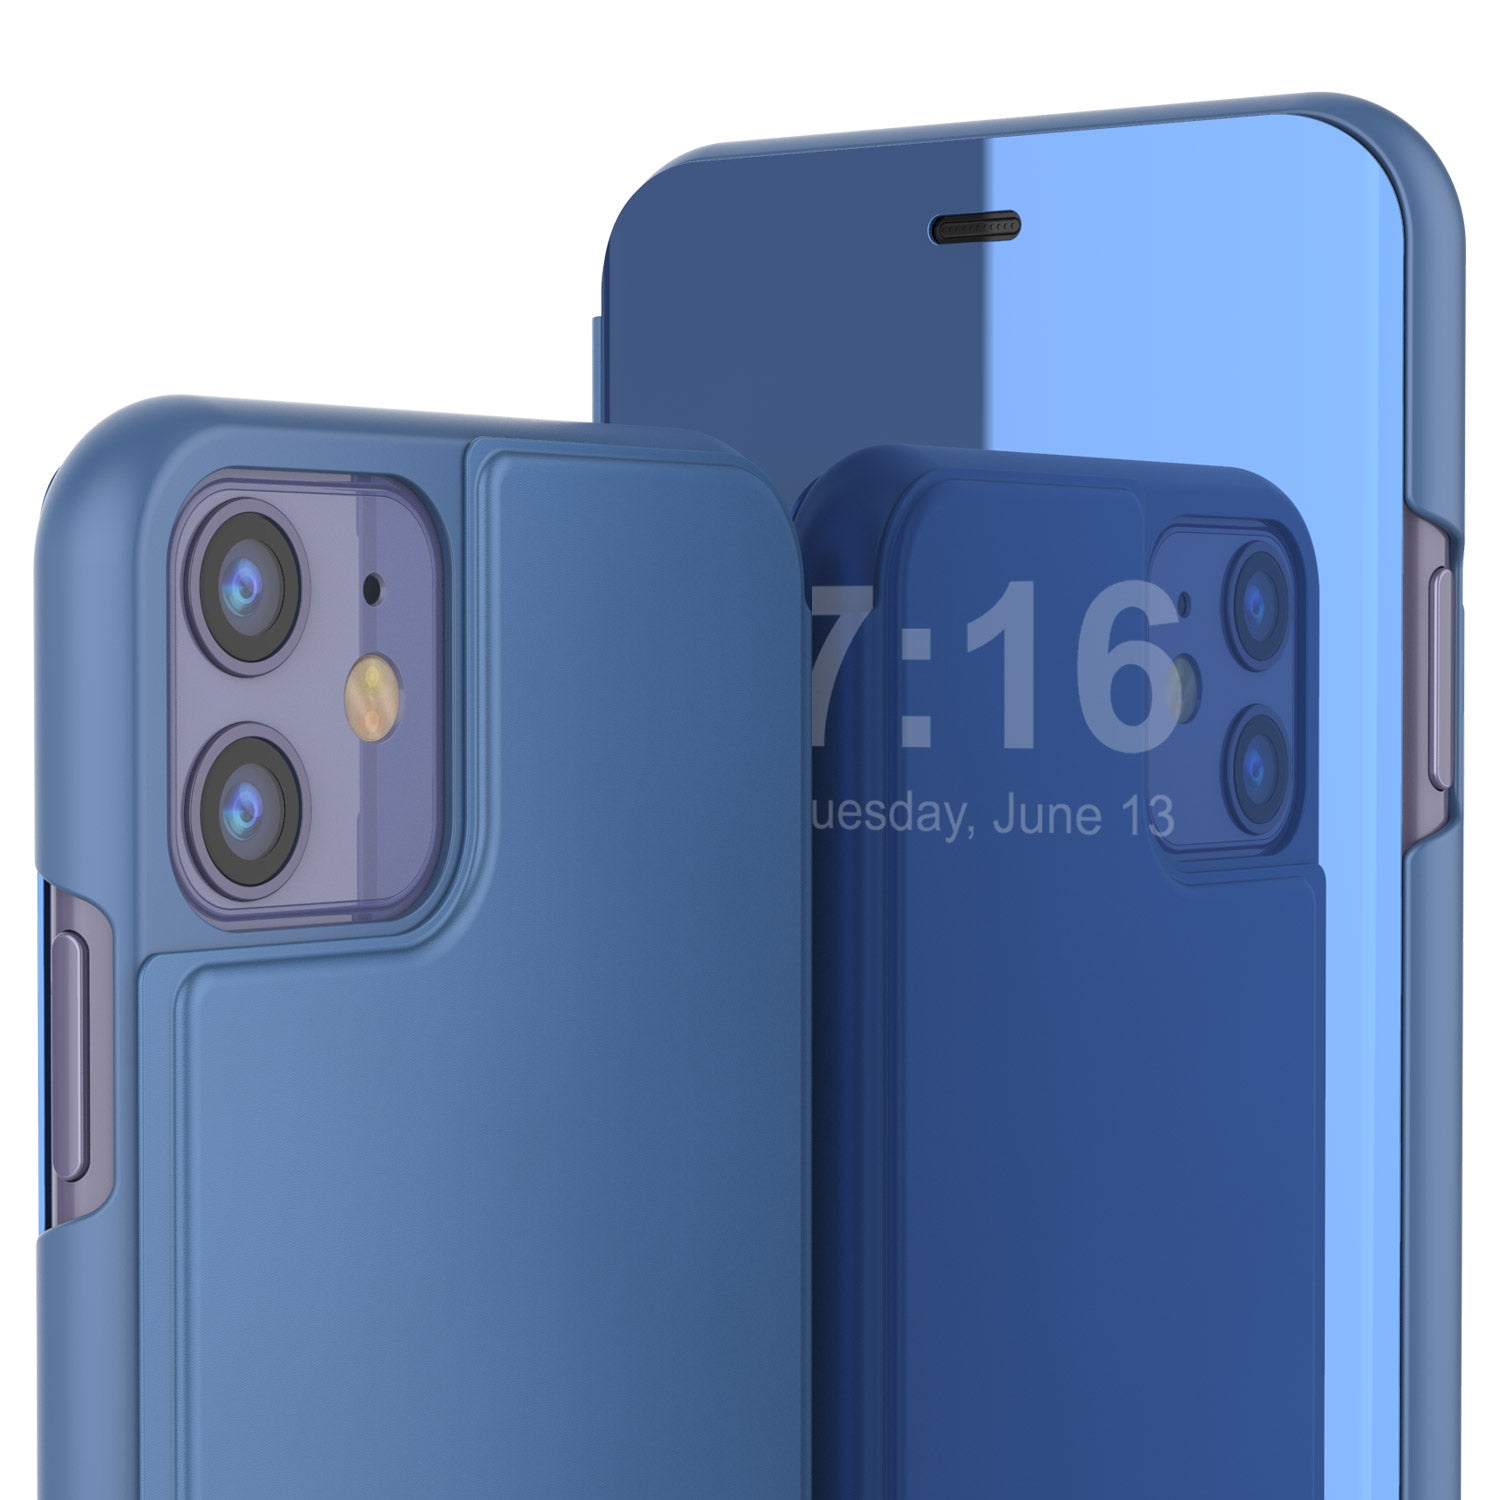 Punkcase iPhone 11 / XI Reflector Case Protective Flip Cover [Blue]